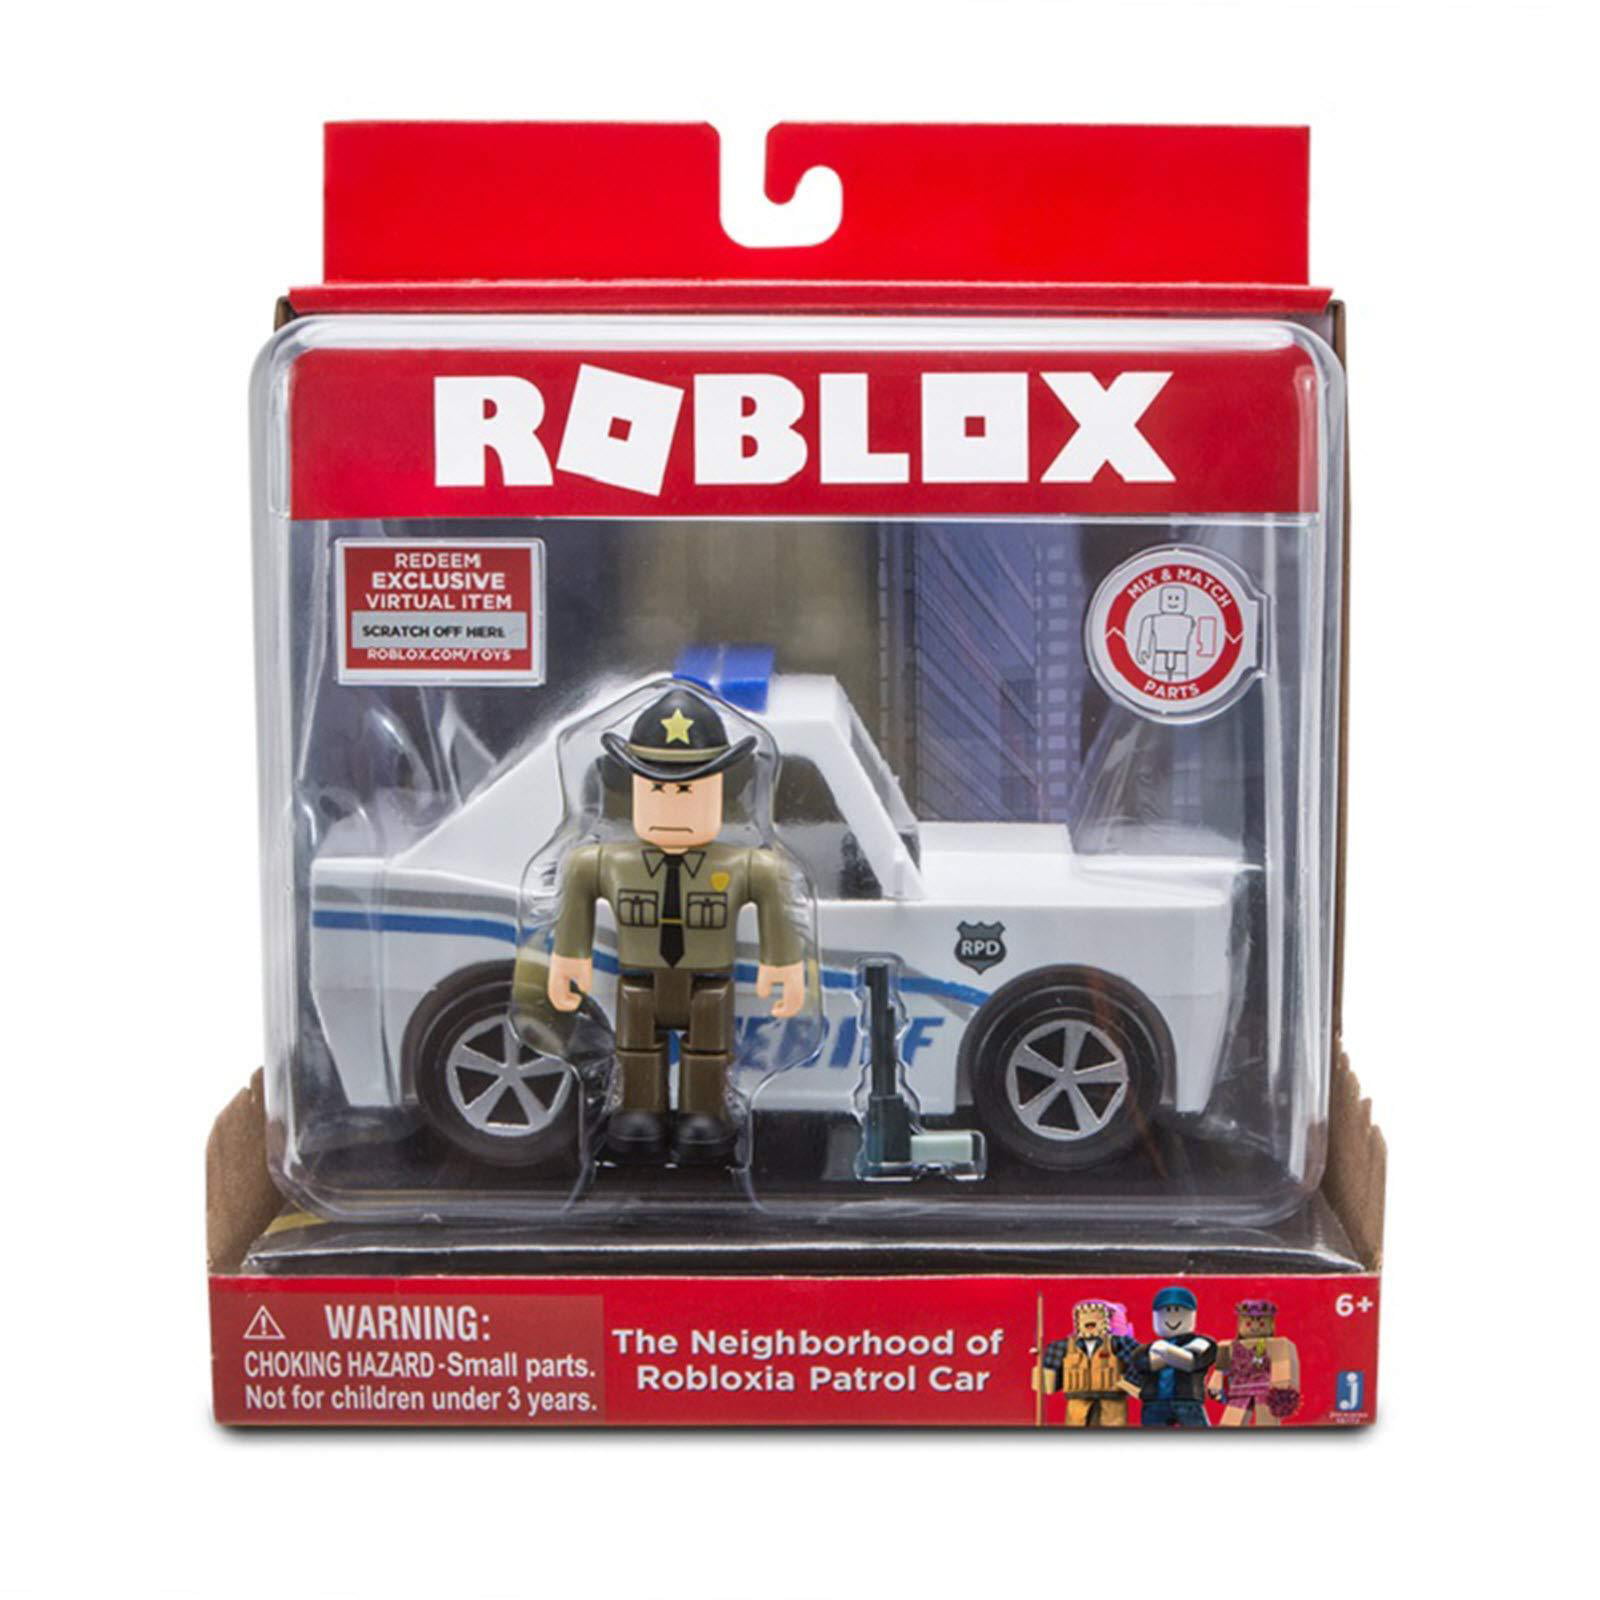 Roblox Action Collection The Neighborhood Of Robloxia Patrol Car Vehicle Includes Exclusive Virtual Item Walmart Com Walmart Com - roblox neighborhood of robloxia roleplay